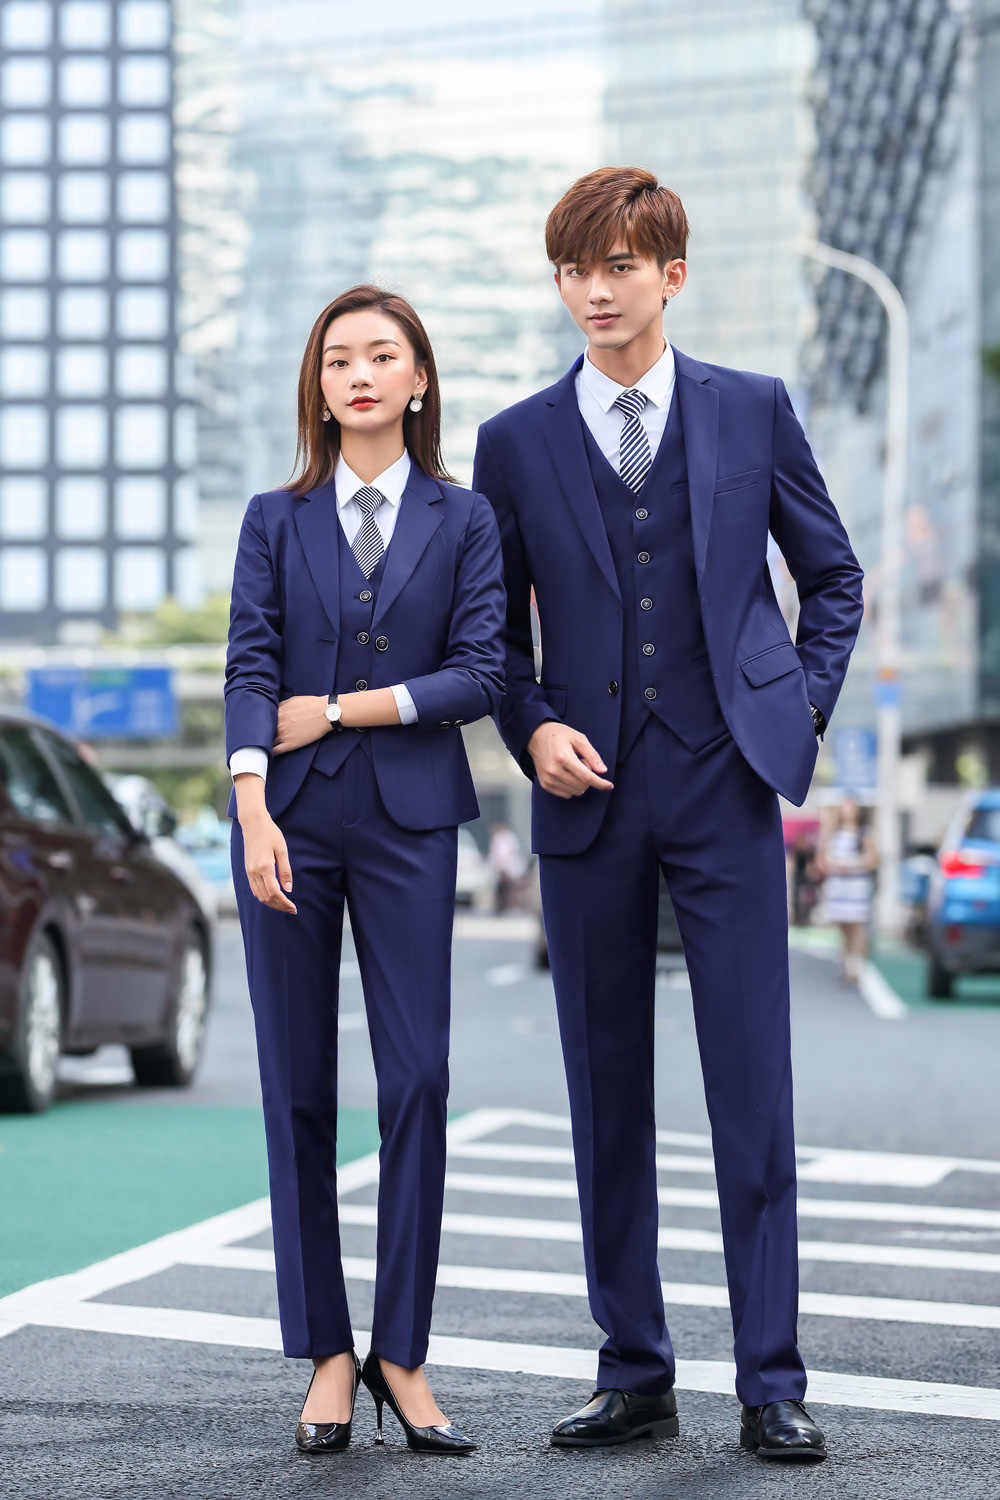 matching suit. 50+ Stylish Formal Matching Outfits for Couples - 23